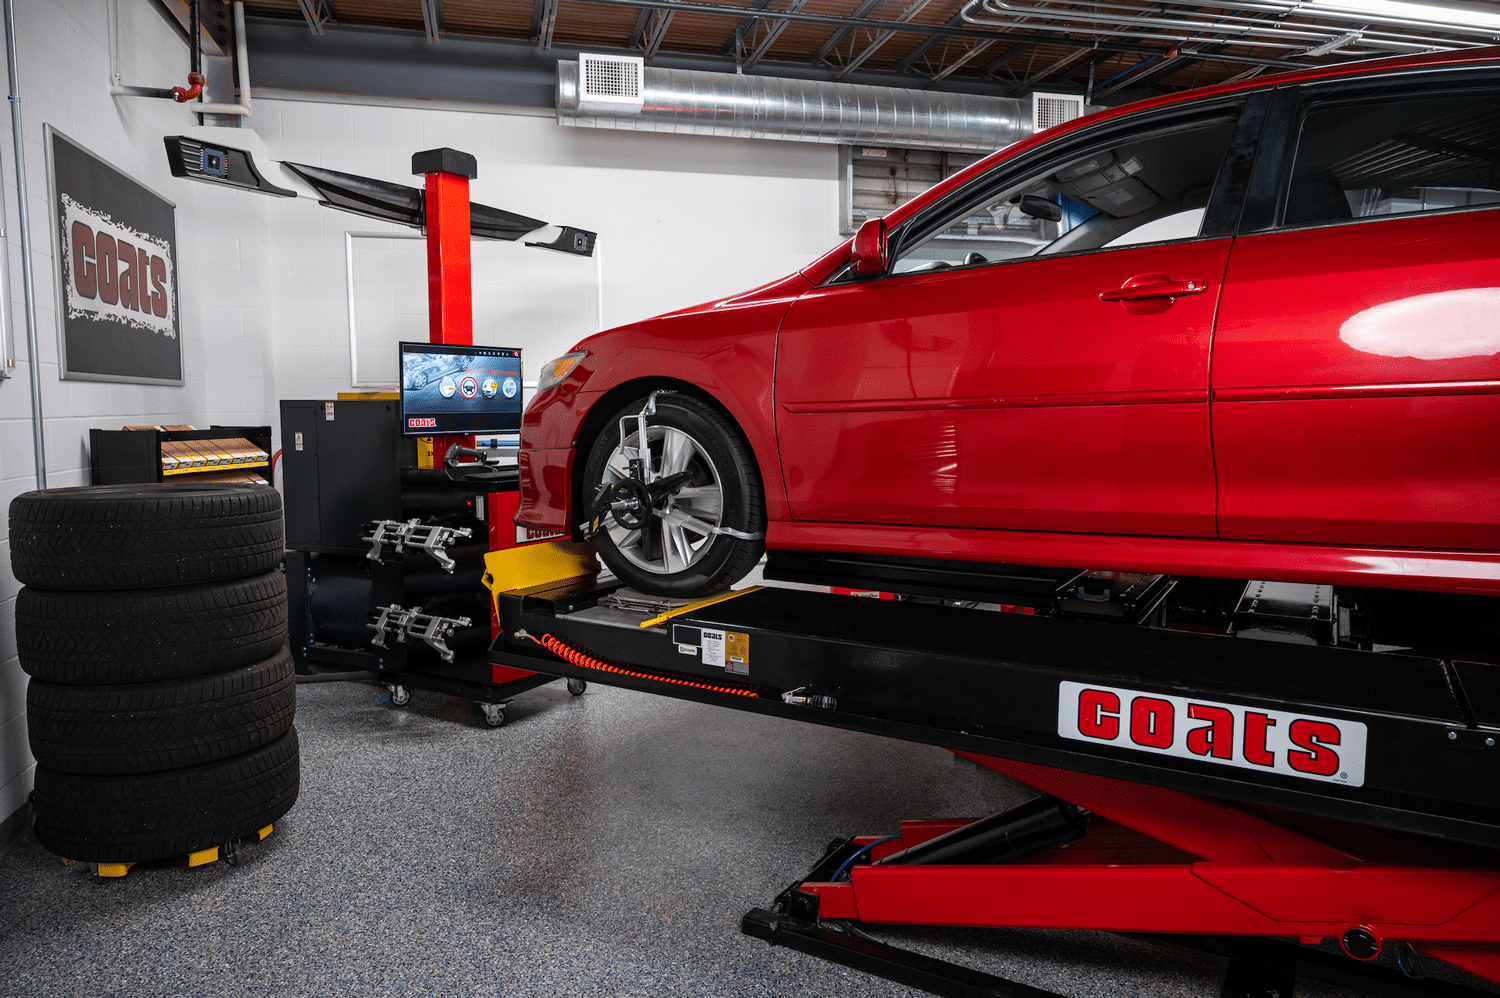 A red sedan is being serviced on a Coats alignment scissor lift, facing a Coats 6500 wheel aligner